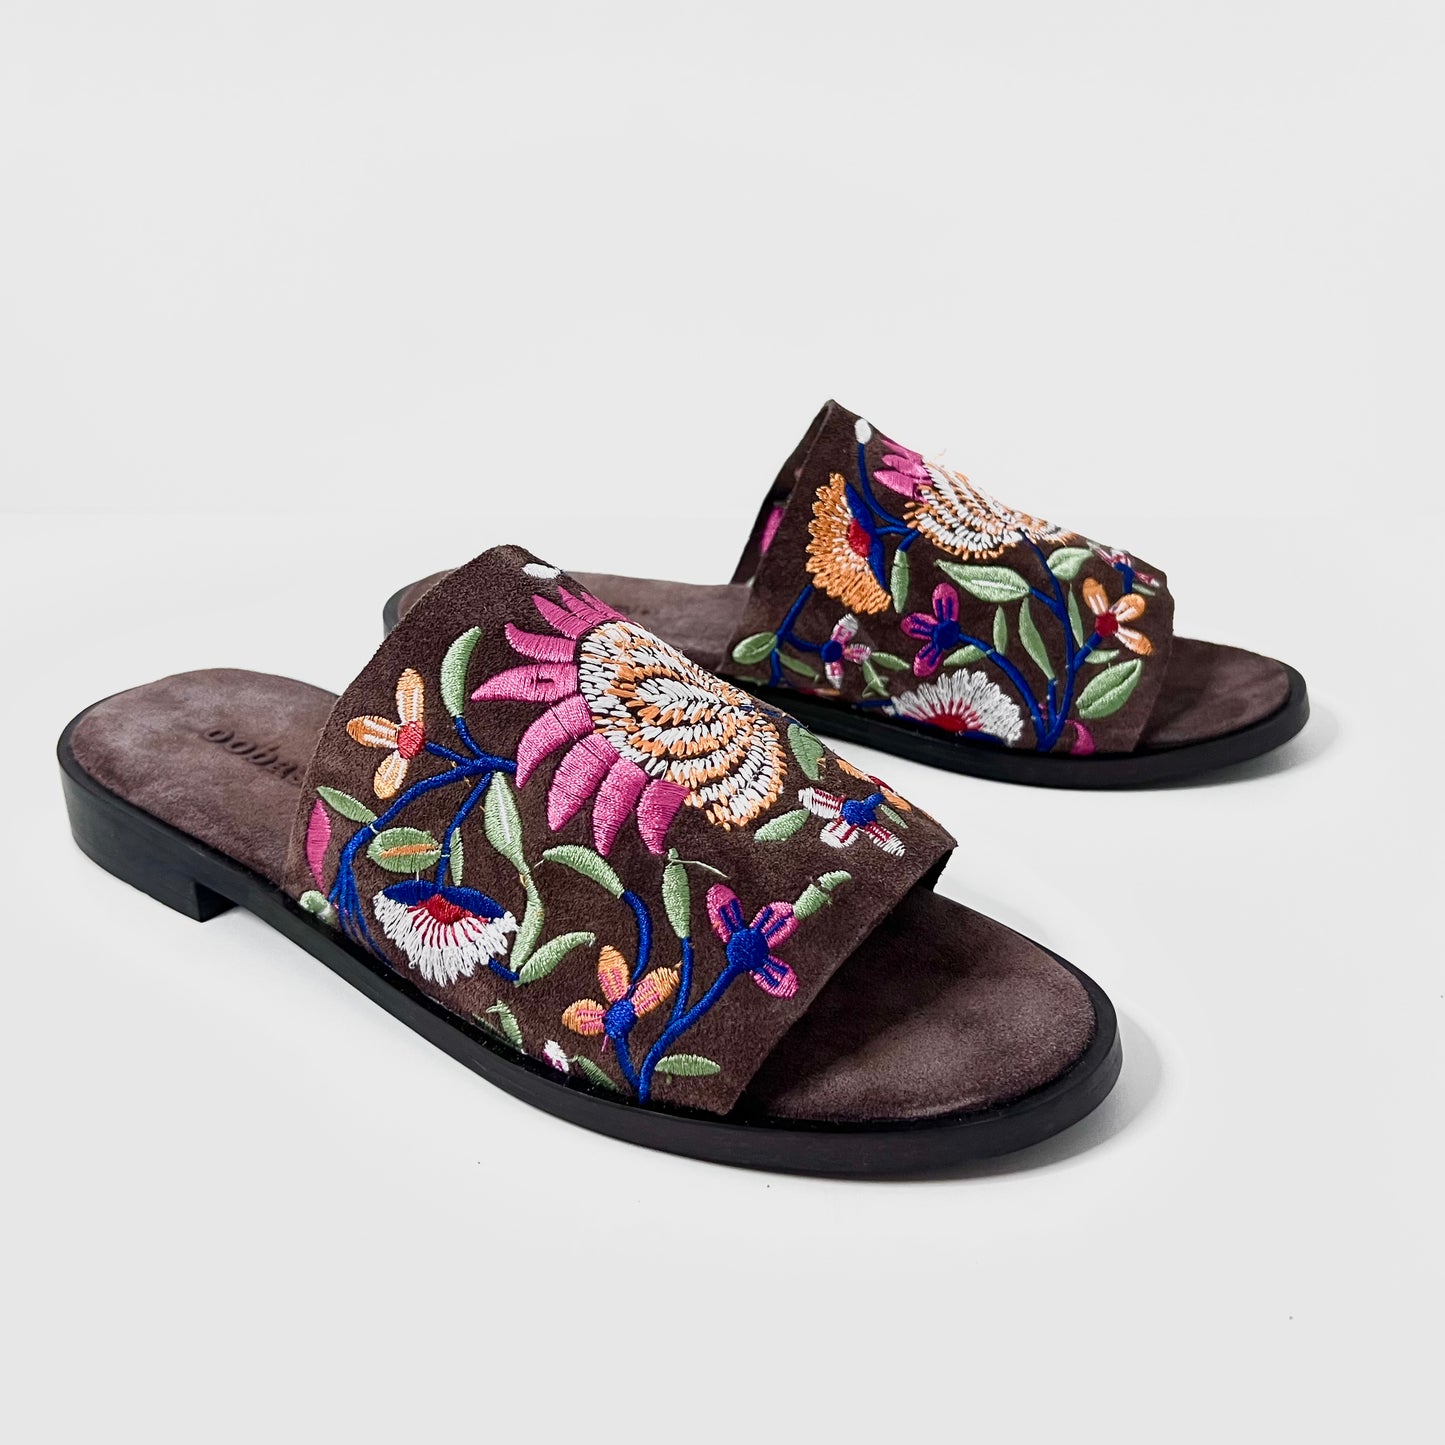 oobash Rose Brown colour embroidered suede leather Mule sandal